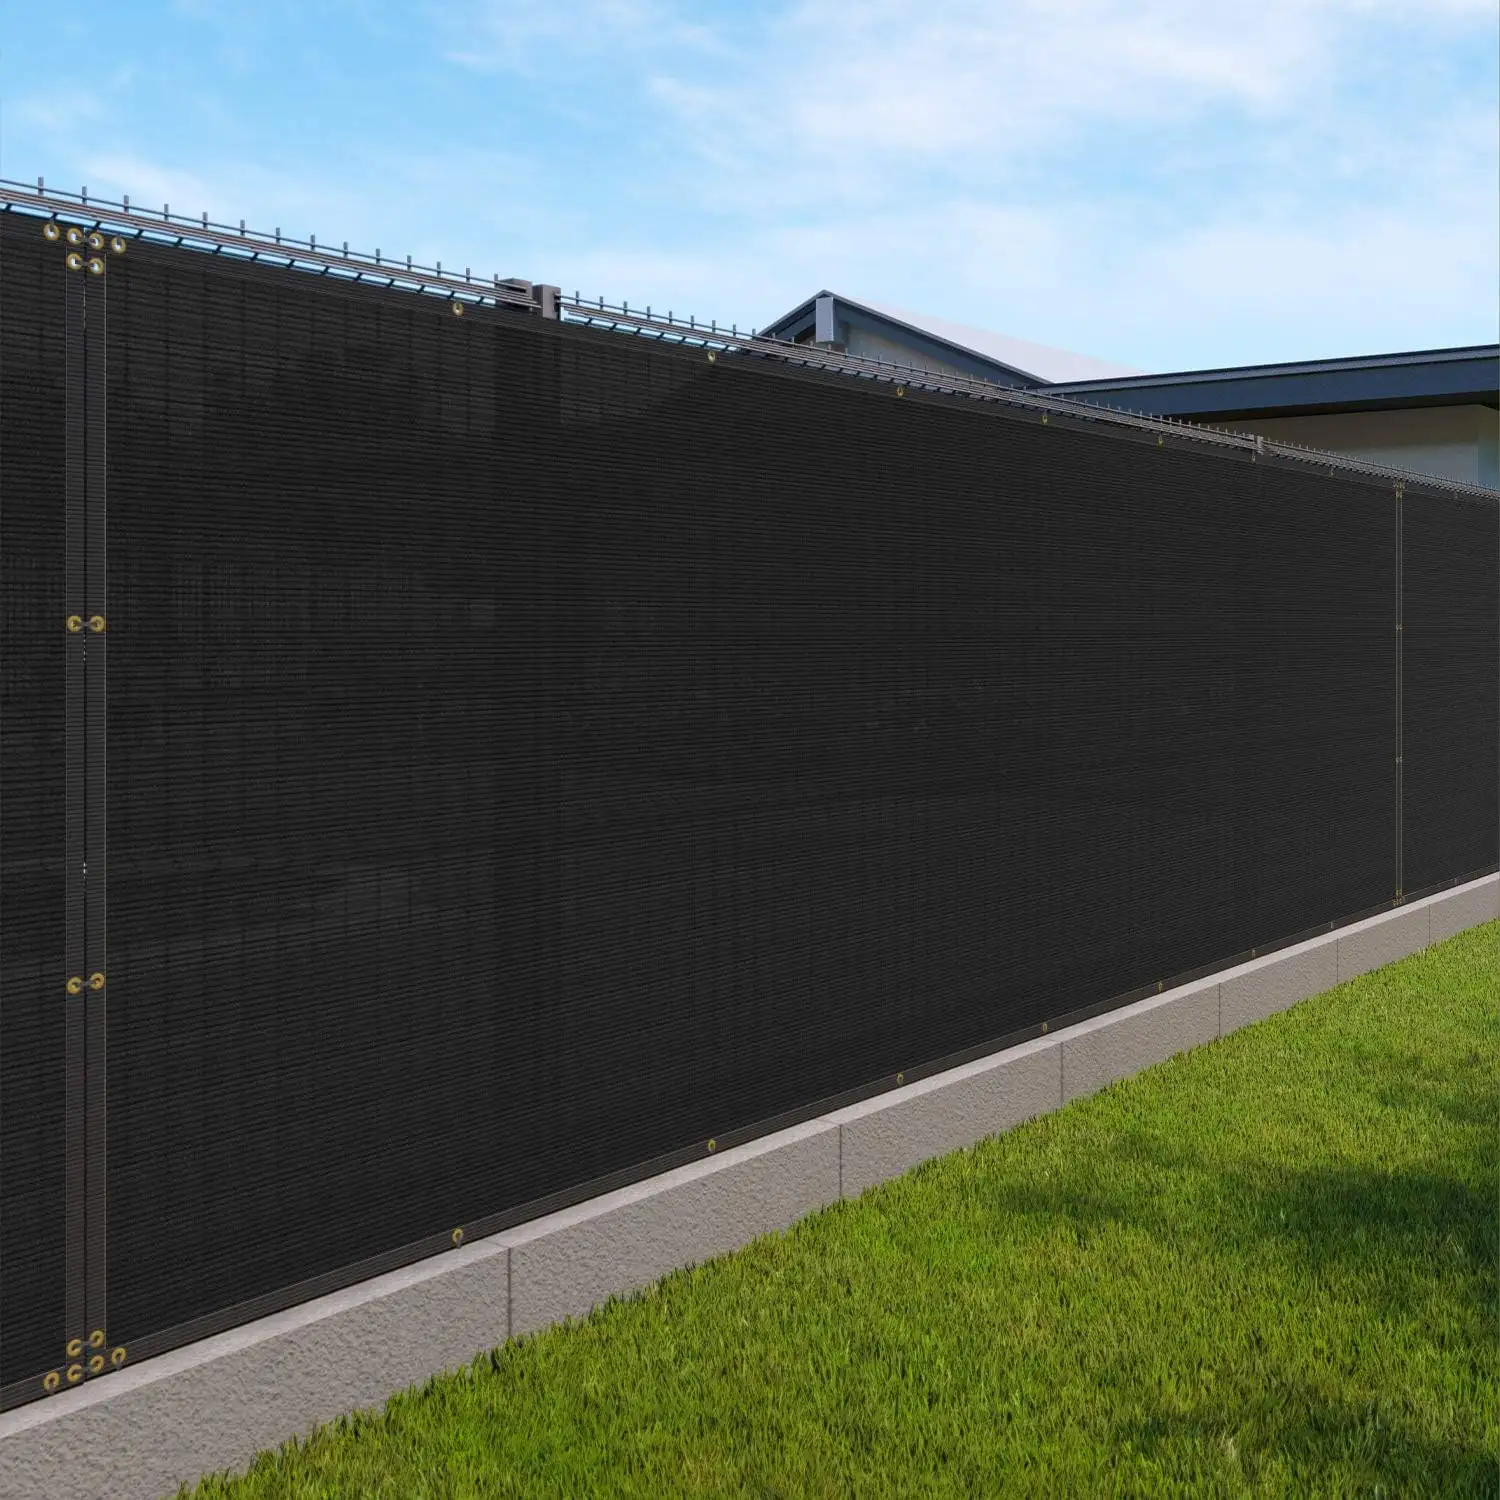 6'x50' Black Privacy Fence Screen Heavy Duty Windscreen Fencing Mesh Fabric Shade Net Cover for Outdoor Wall Garden Yard